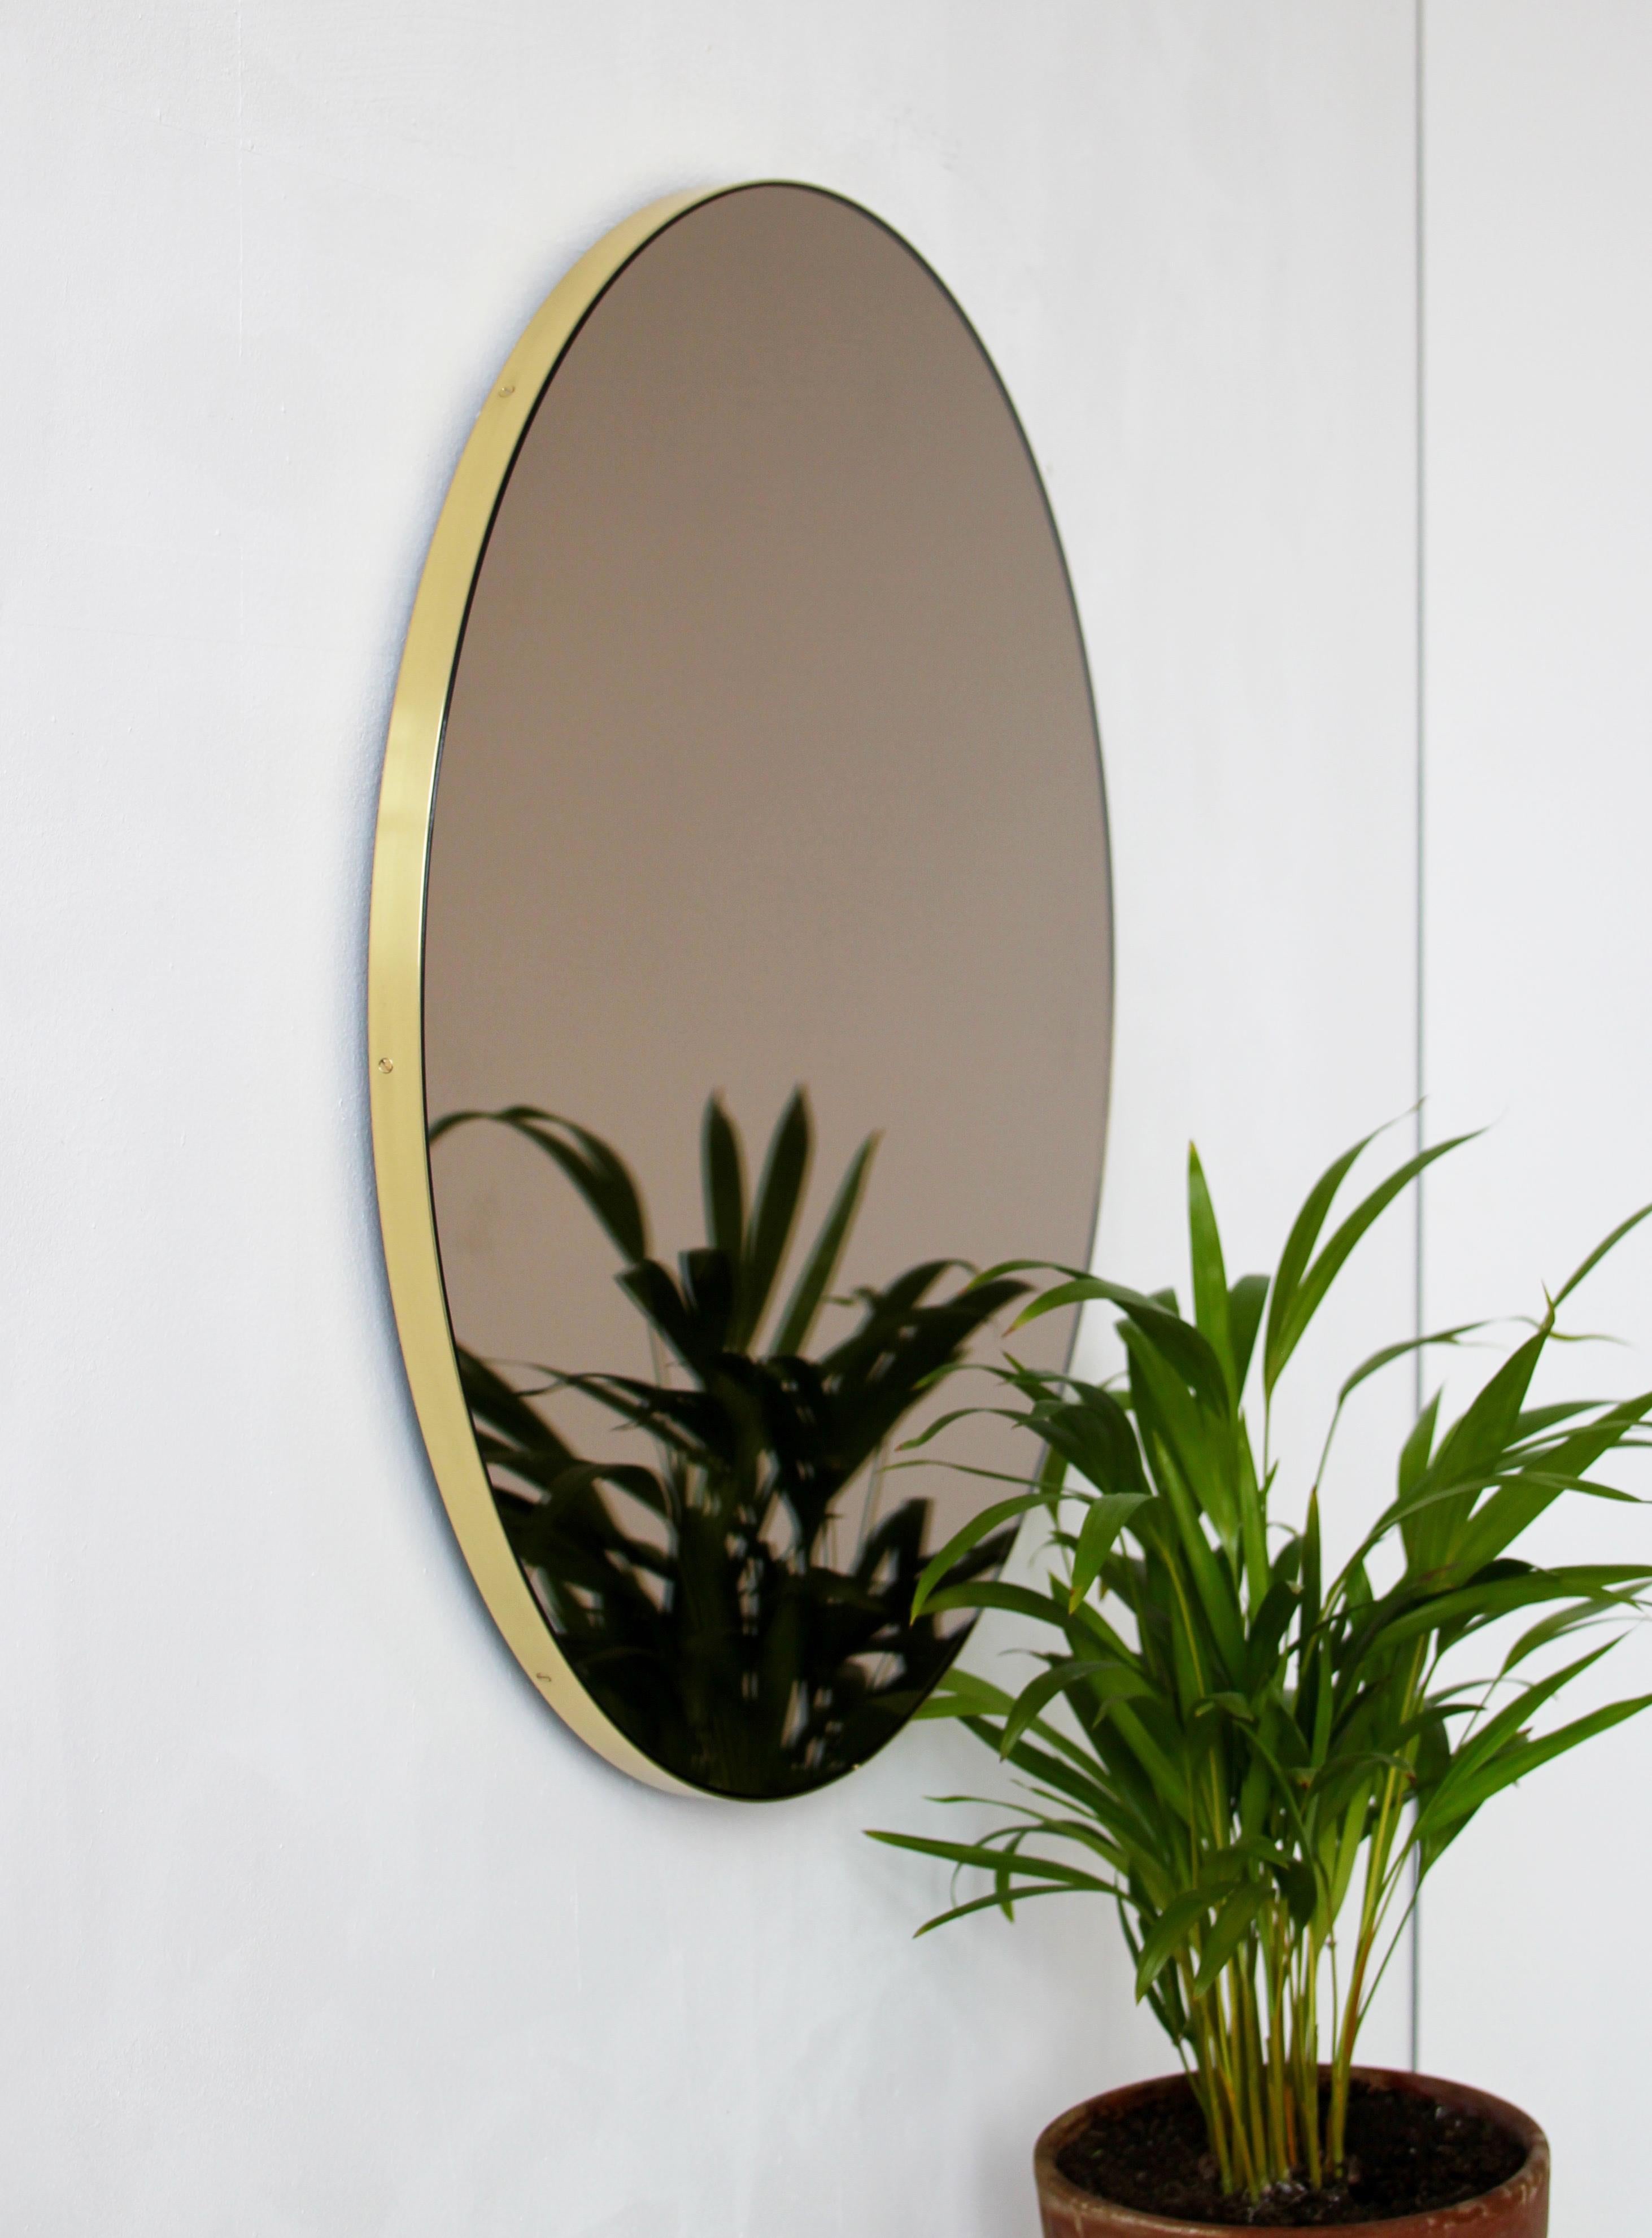 Minimalist bronze tinted round mirror with an elegant brushed brass frame. The detailing and finish, including visible brass screws, emphasise the crafty and quality feel of the mirror, a true signature of our brand. Designed and handcrafted in